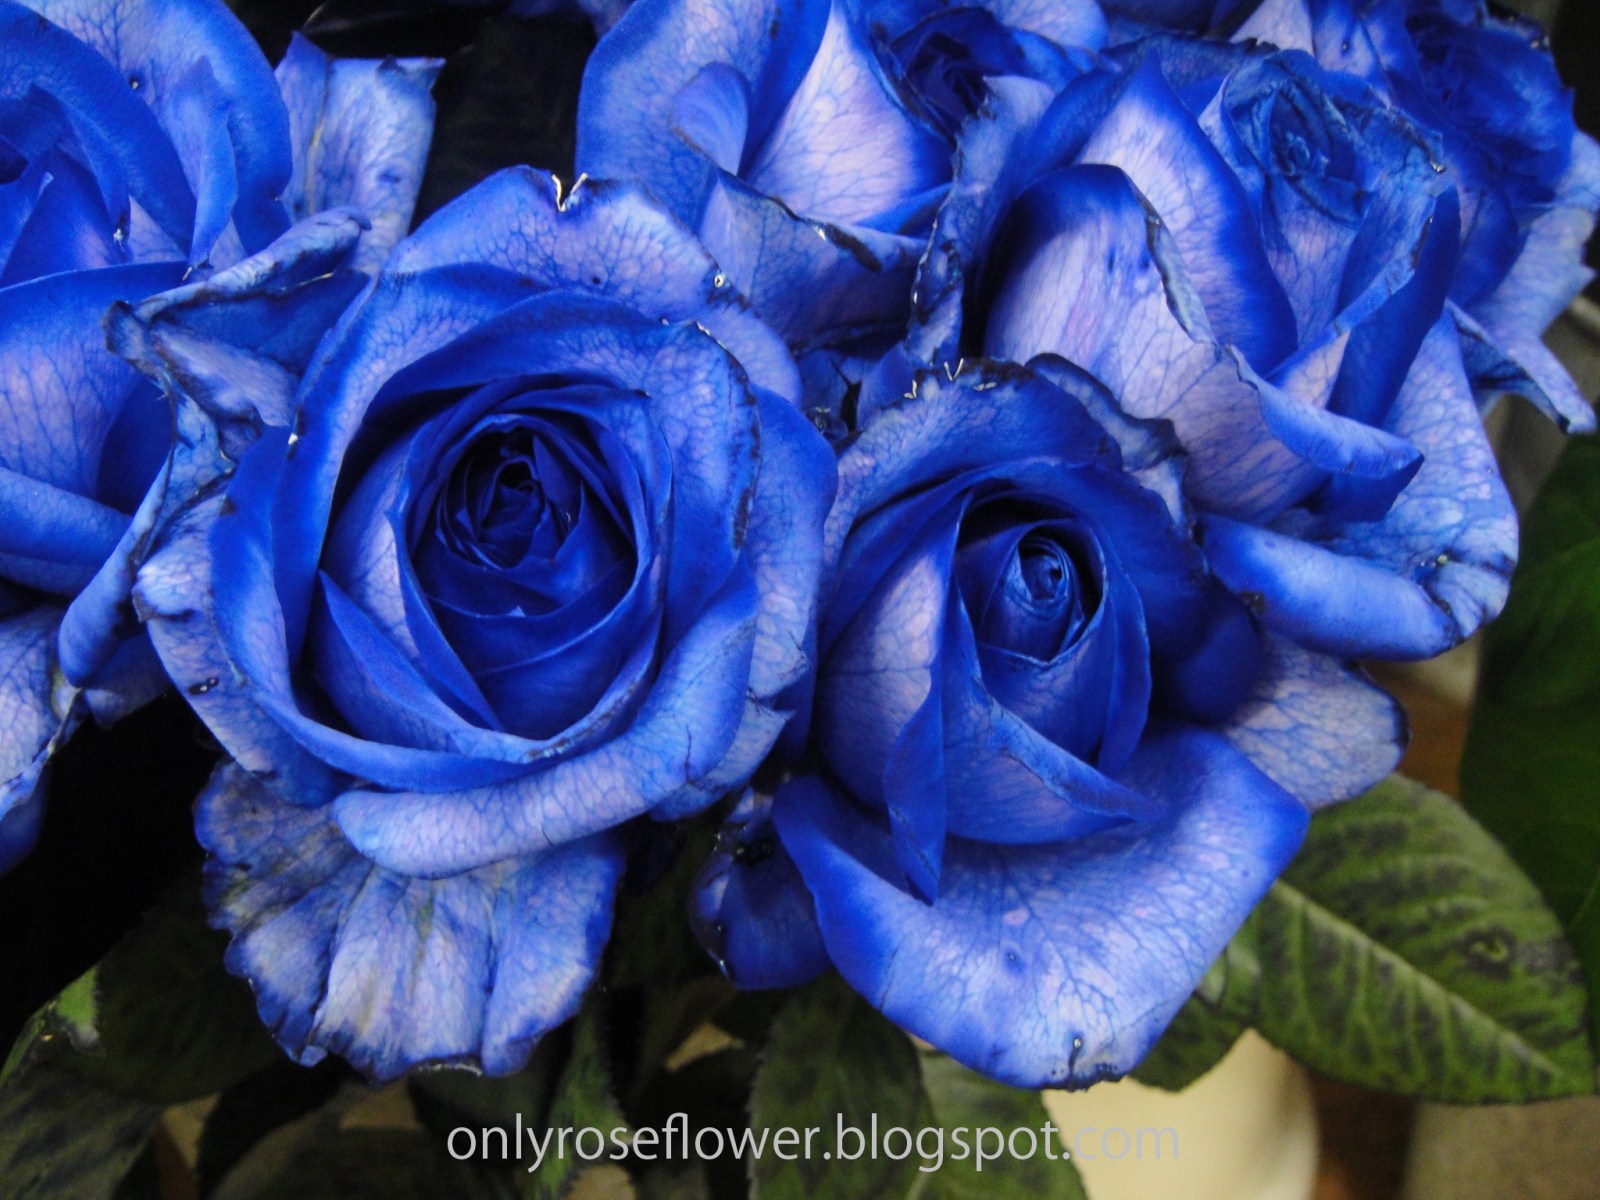 Wallpaper of Blue Rose || Only beautiful Roses